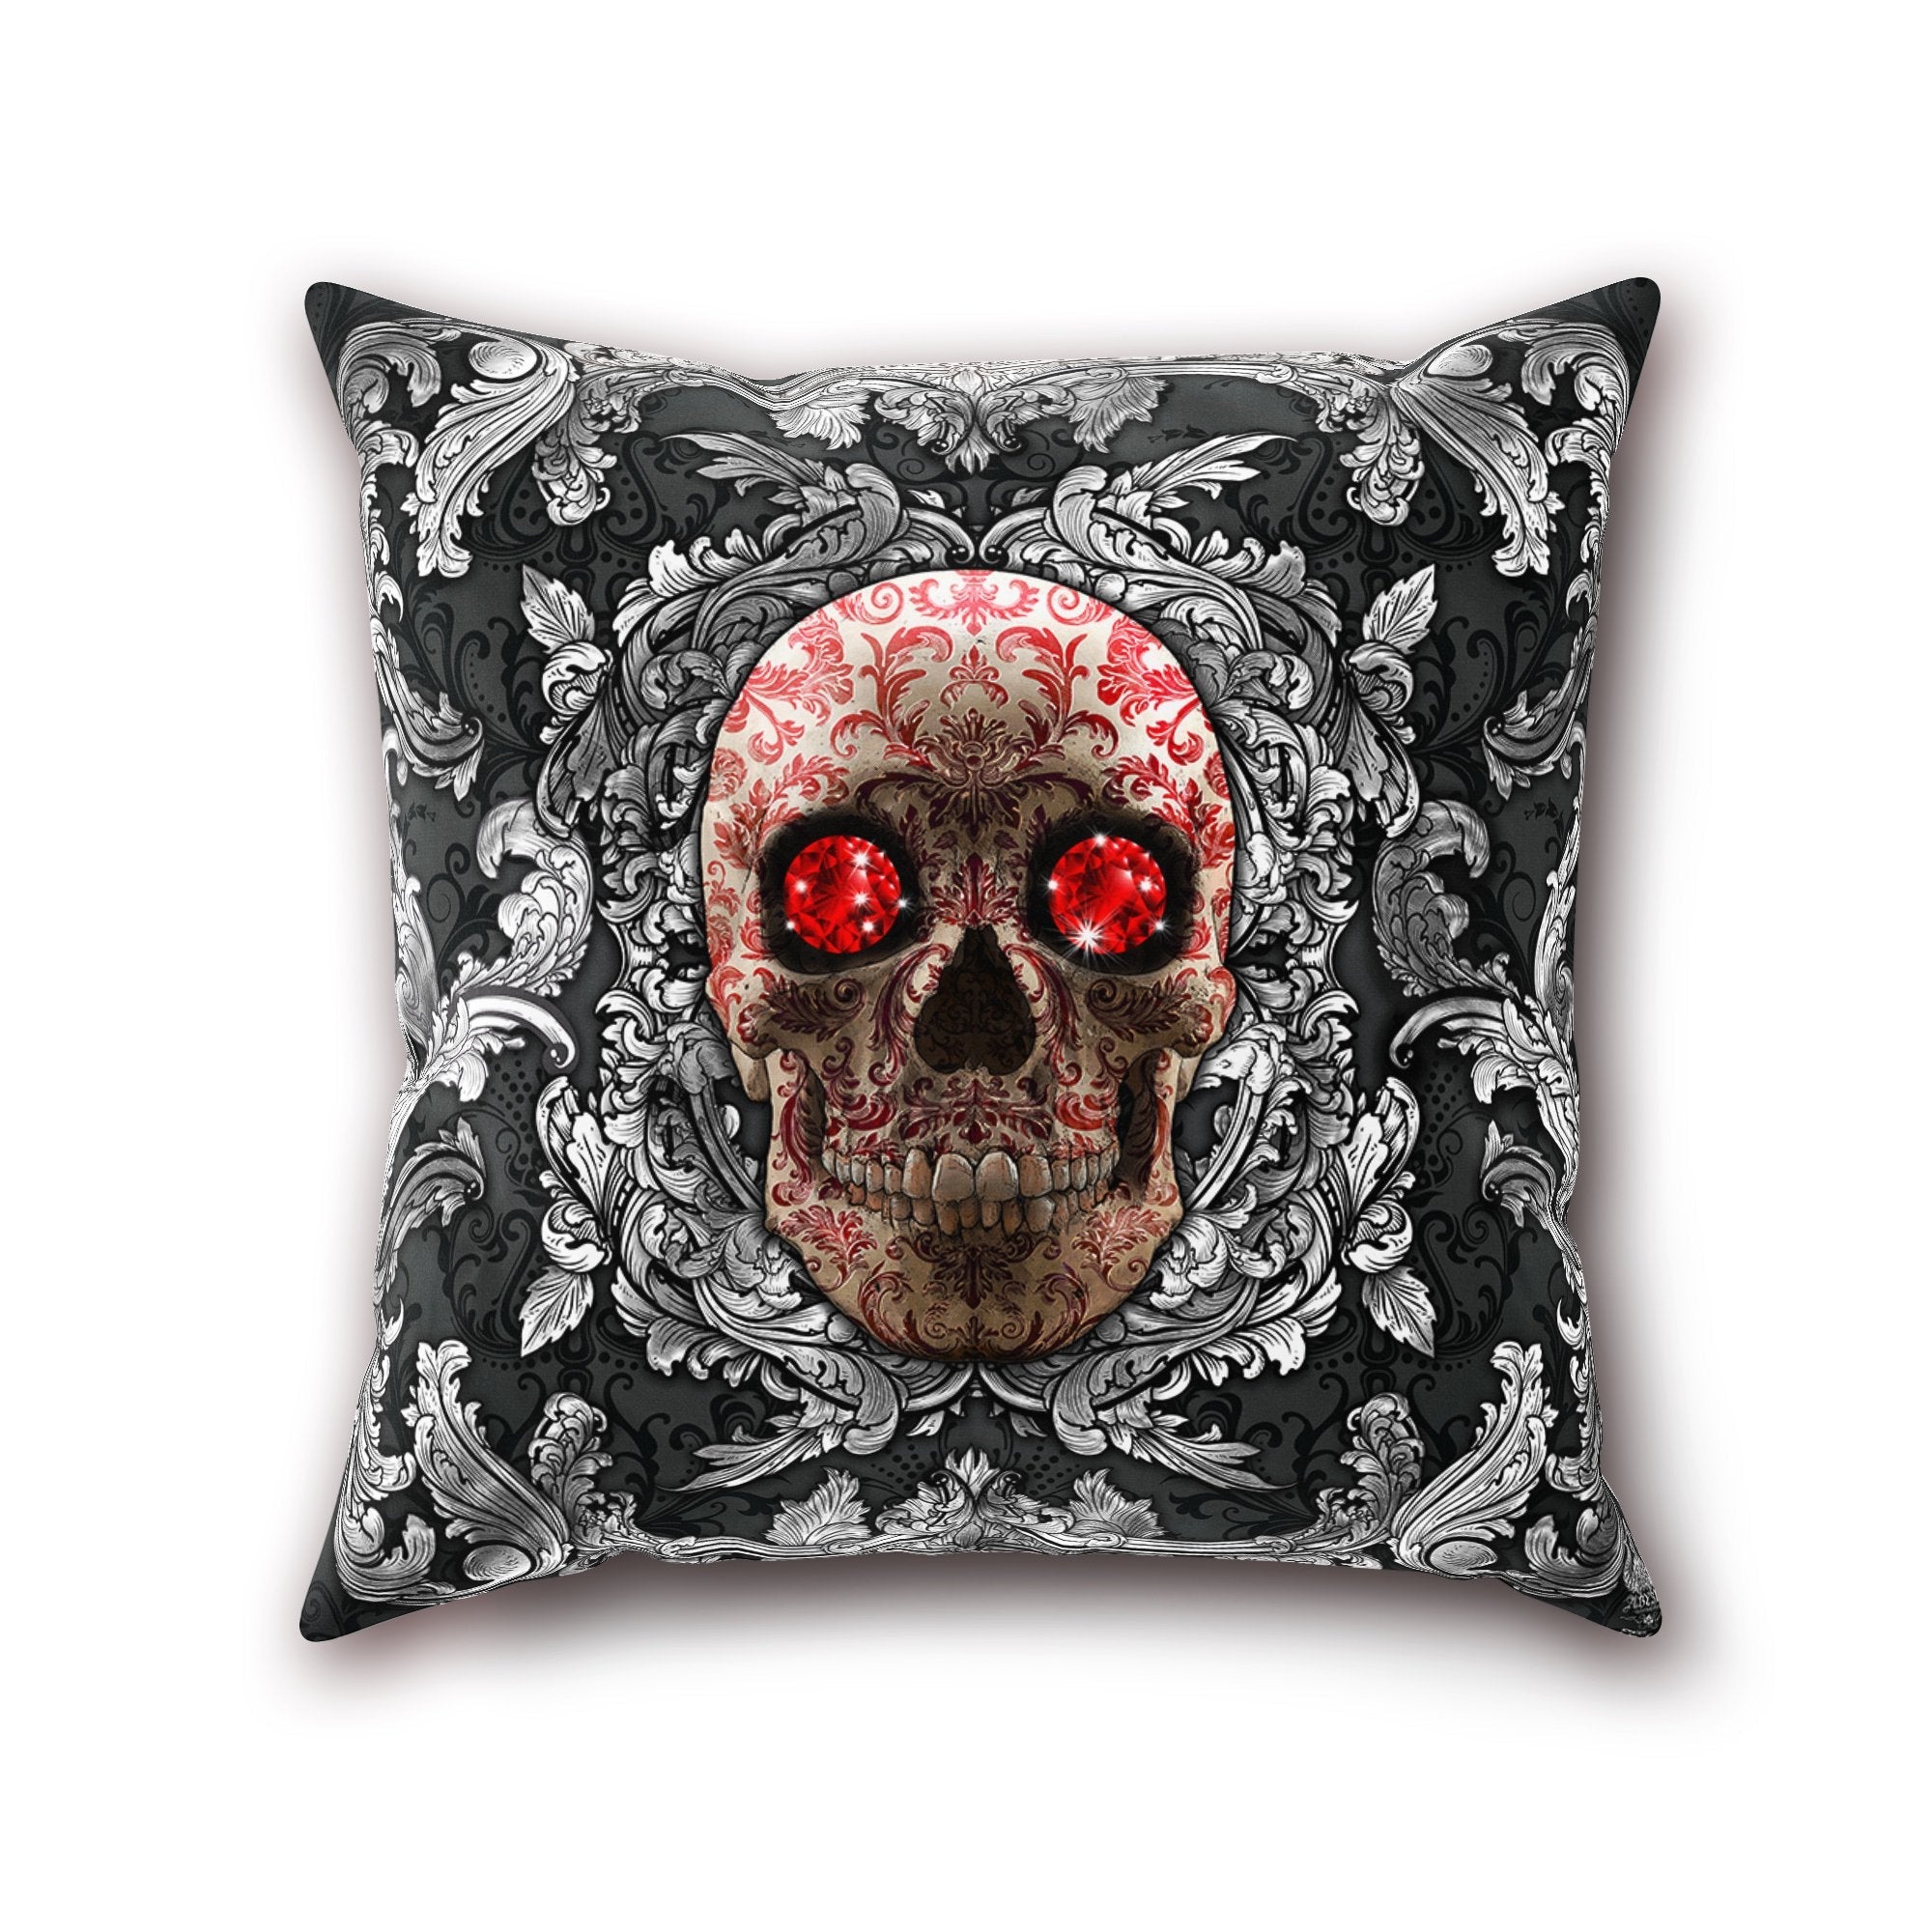 Skull Throw Pillow, Decorative Accent Cushion, Vintage, Baroque Decor, Macabre Art, Alternative Home, Funky and Eclectic Decor - Silver & Red Roses - Abysm Internal